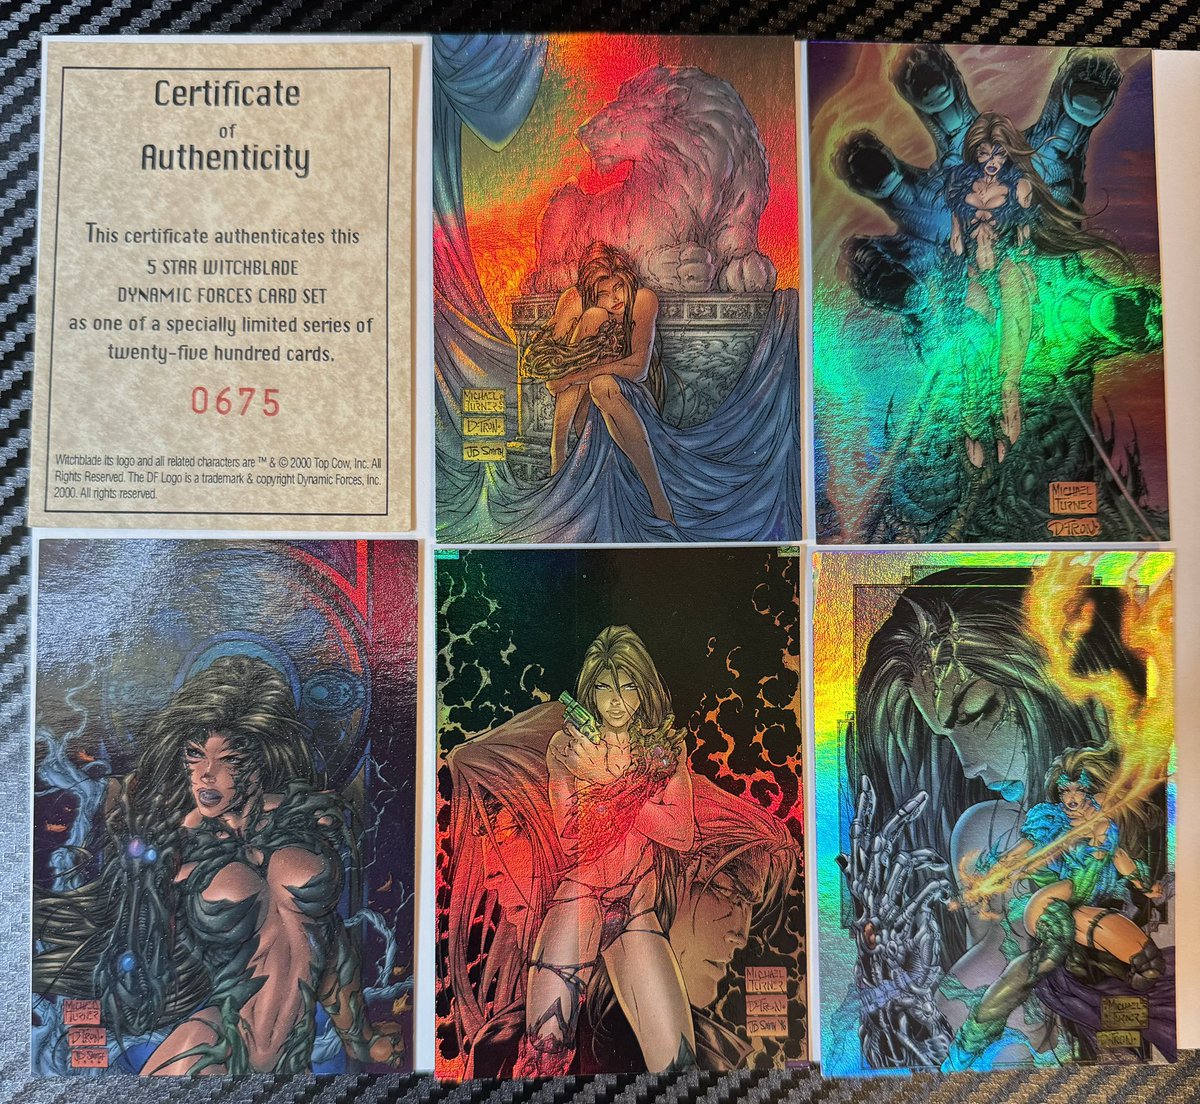 OK, so here they are. These are the cards that I got today when I was at the comic book store. @rholmes0520  @TopCow @DailyTurnerArt